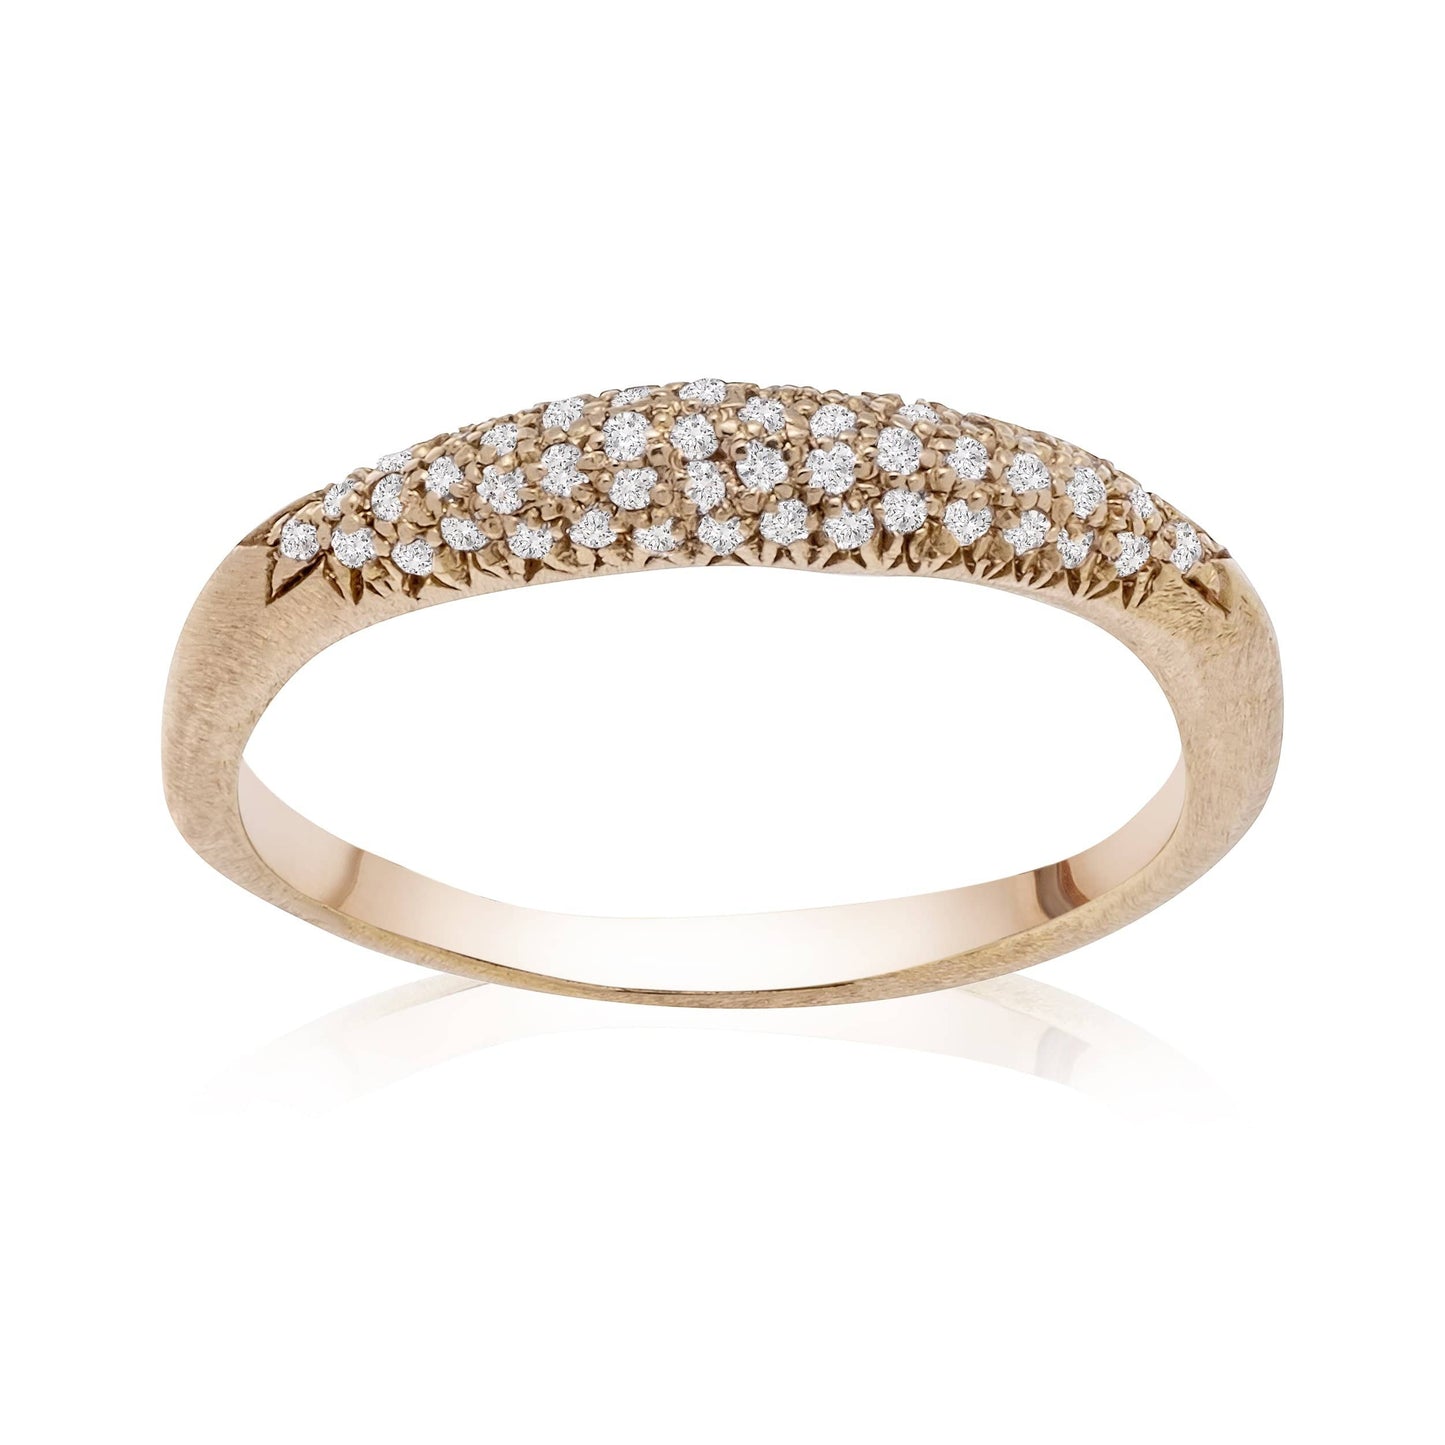 Dalia T Online Ring Signature Collection 14KT RG Diamond Pave Ring